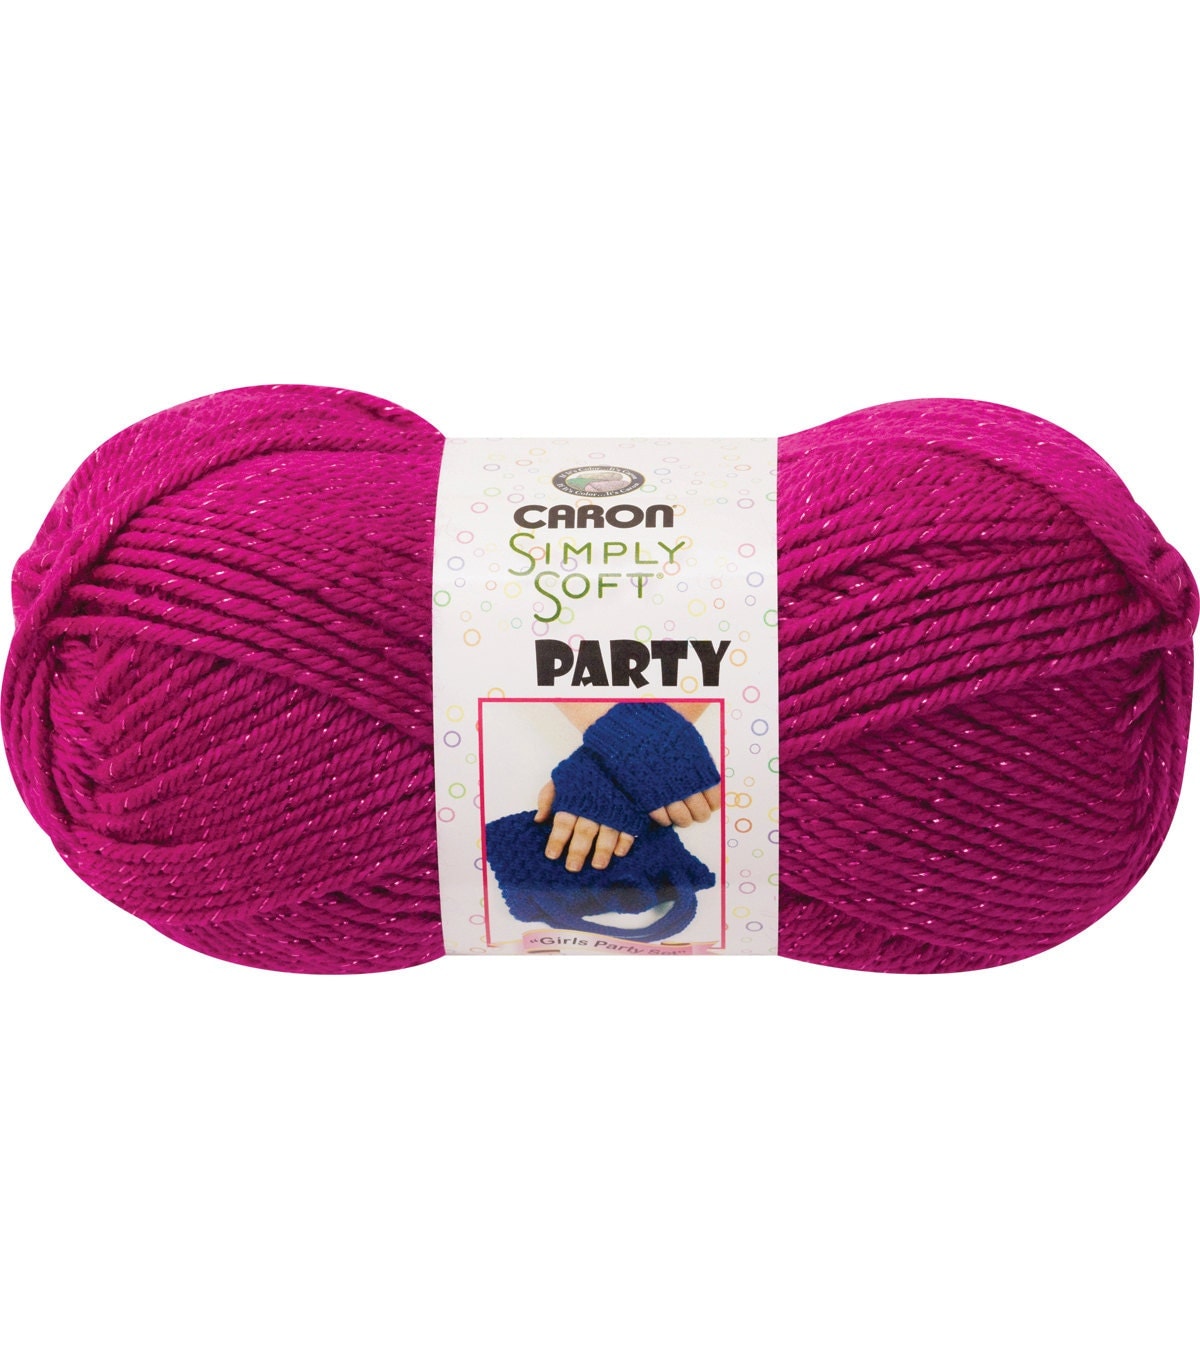 Caron Simply Soft Party Yarn in 3 Colors Choose by ToppyToppyKnits